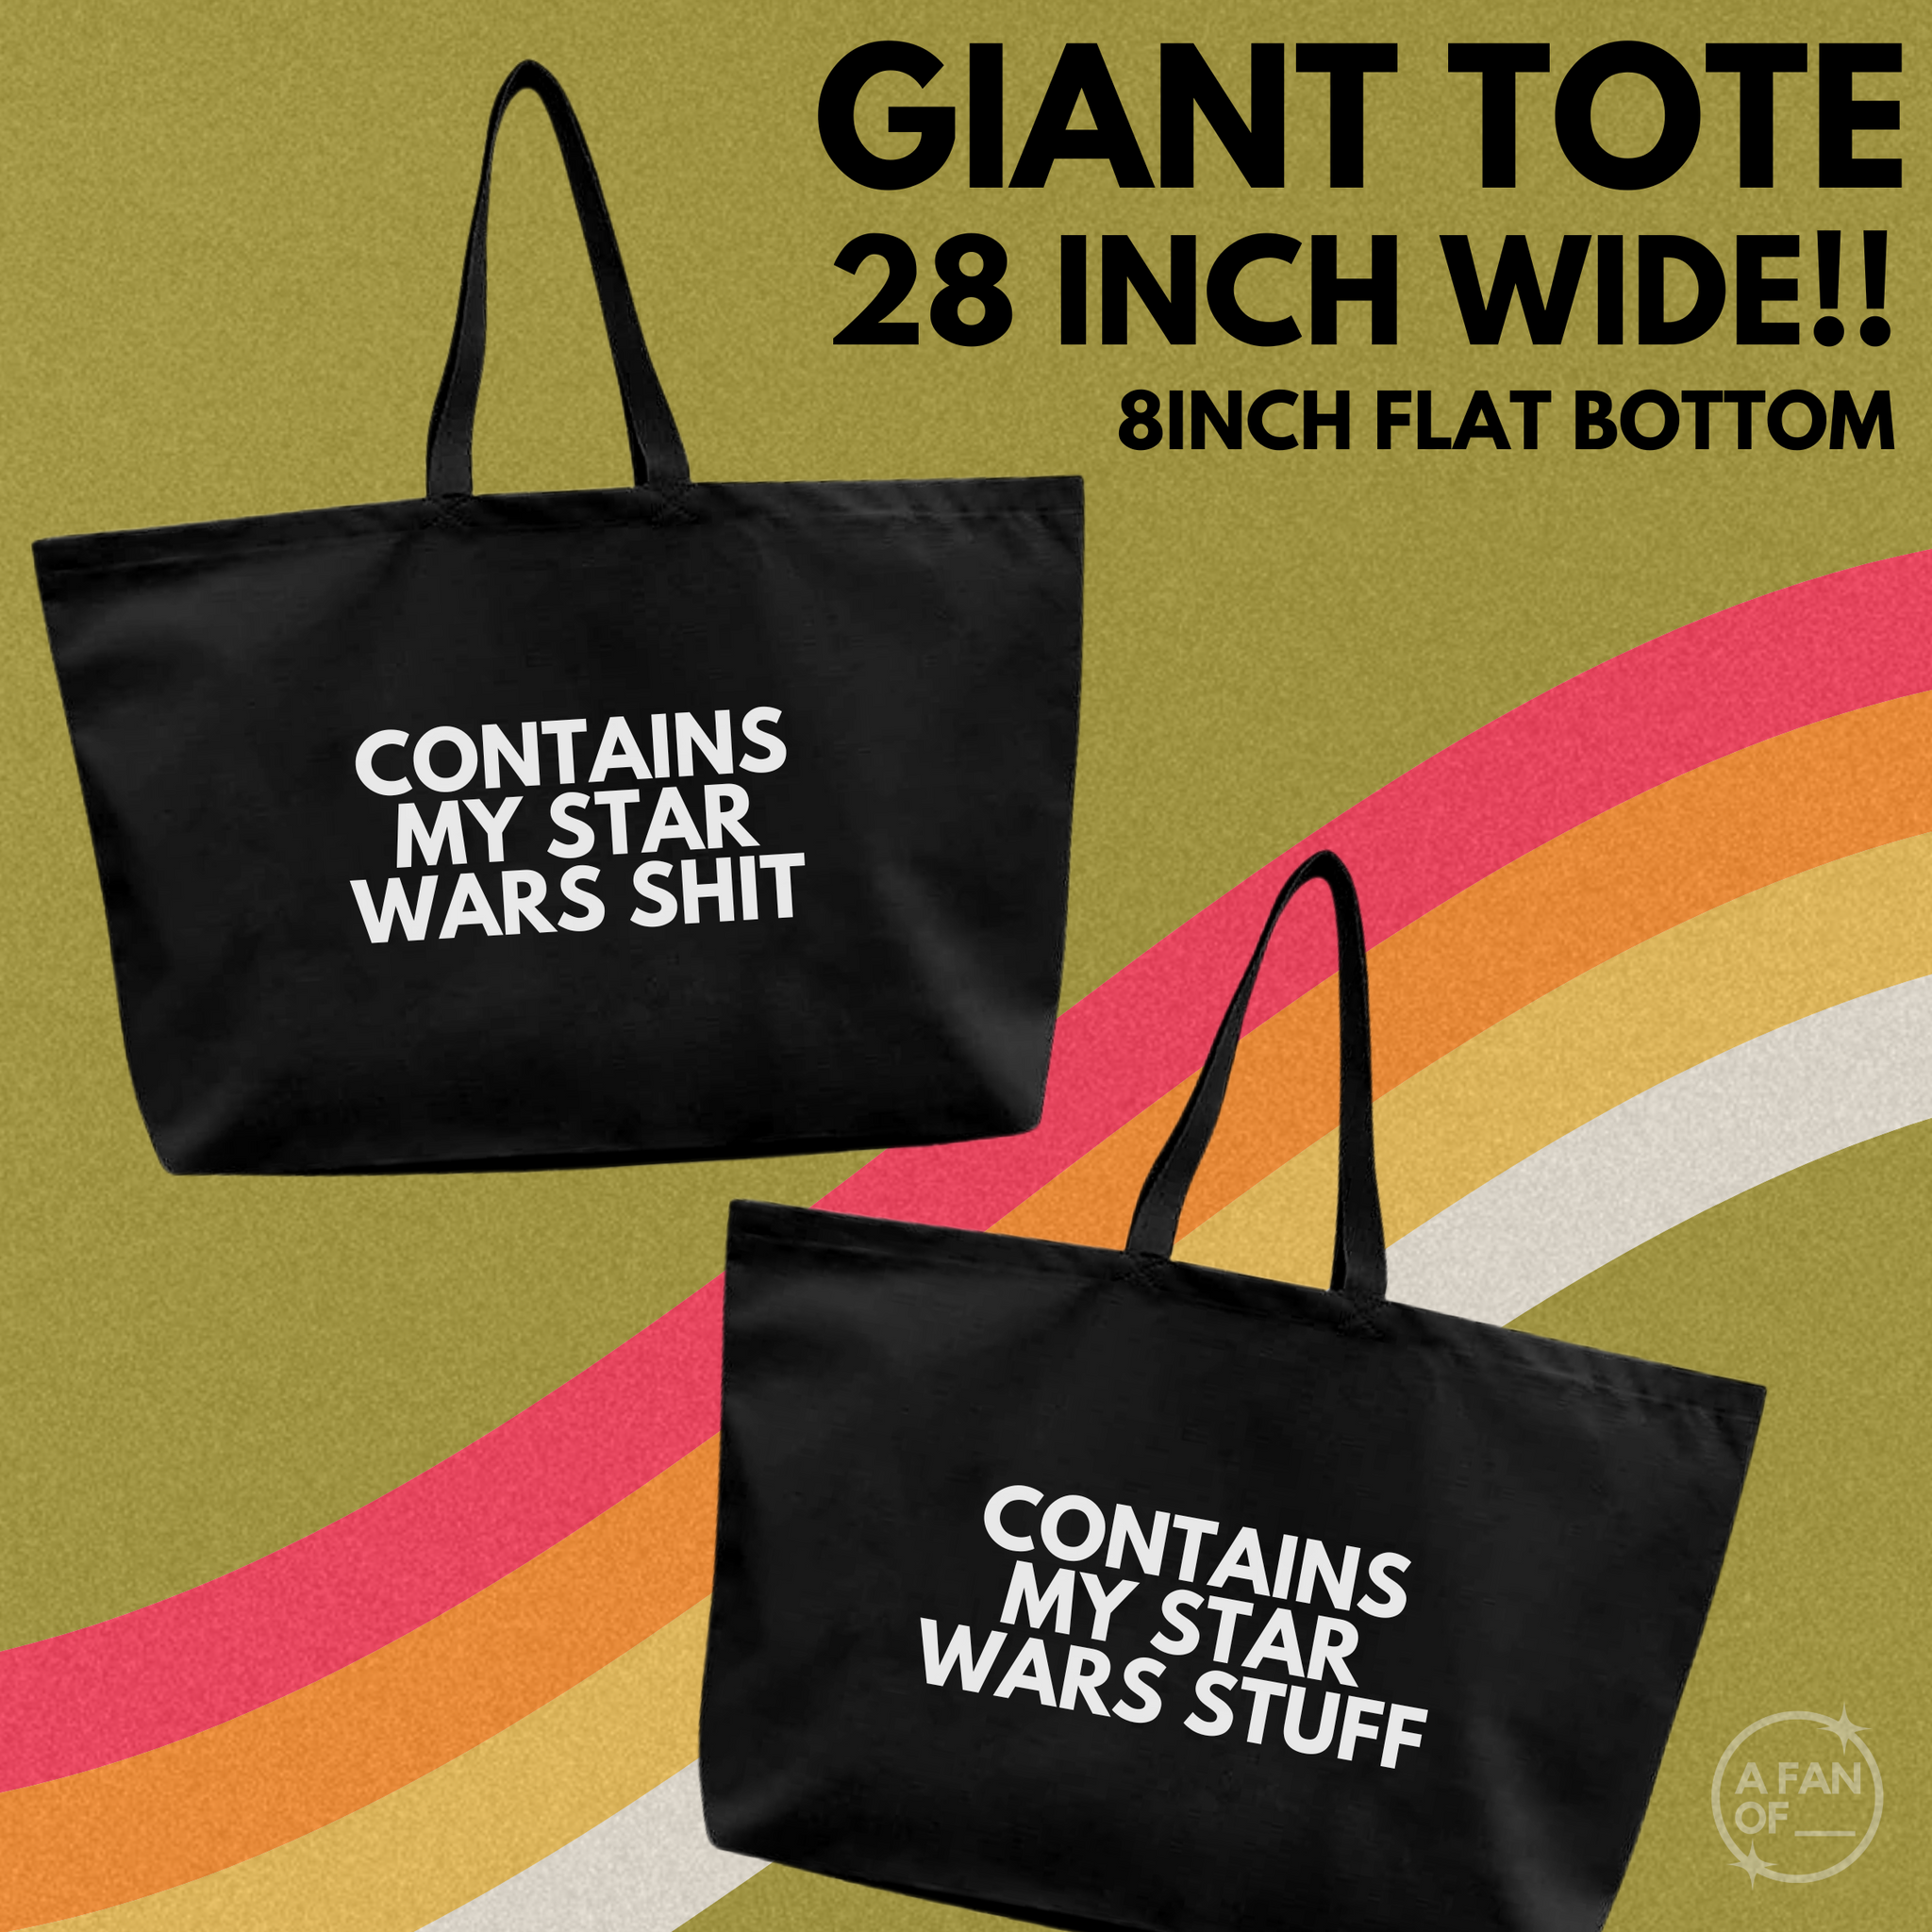 GIANT TOTE